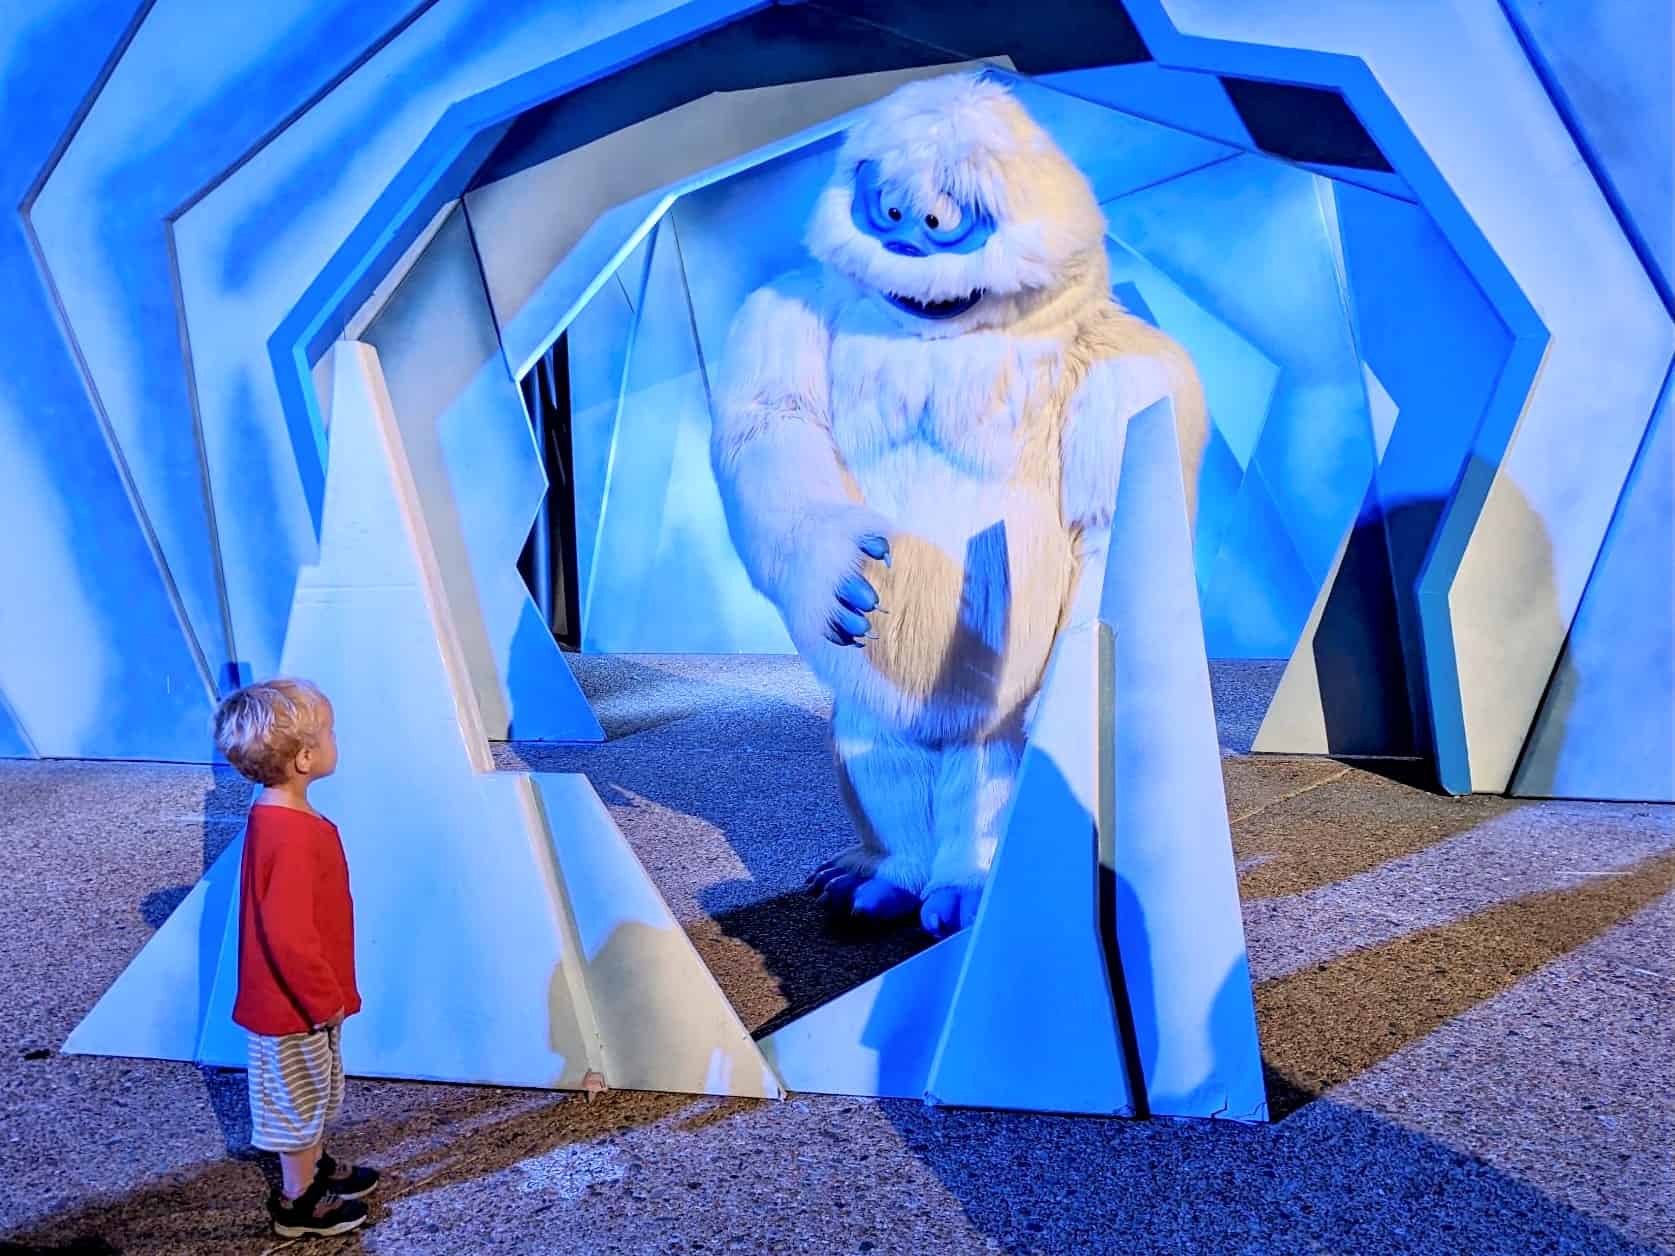 Meeting Bumble from Rudolph the Red Nosed Reindeer at SeaWorld Orlando. A large costumed character has white fur and long limbs with a blue face and hands, looks down at a three year old boy facing him, wearing a red long sleeve shirt and grey shorts. There is a white and blue background to resemble an ice cave. 